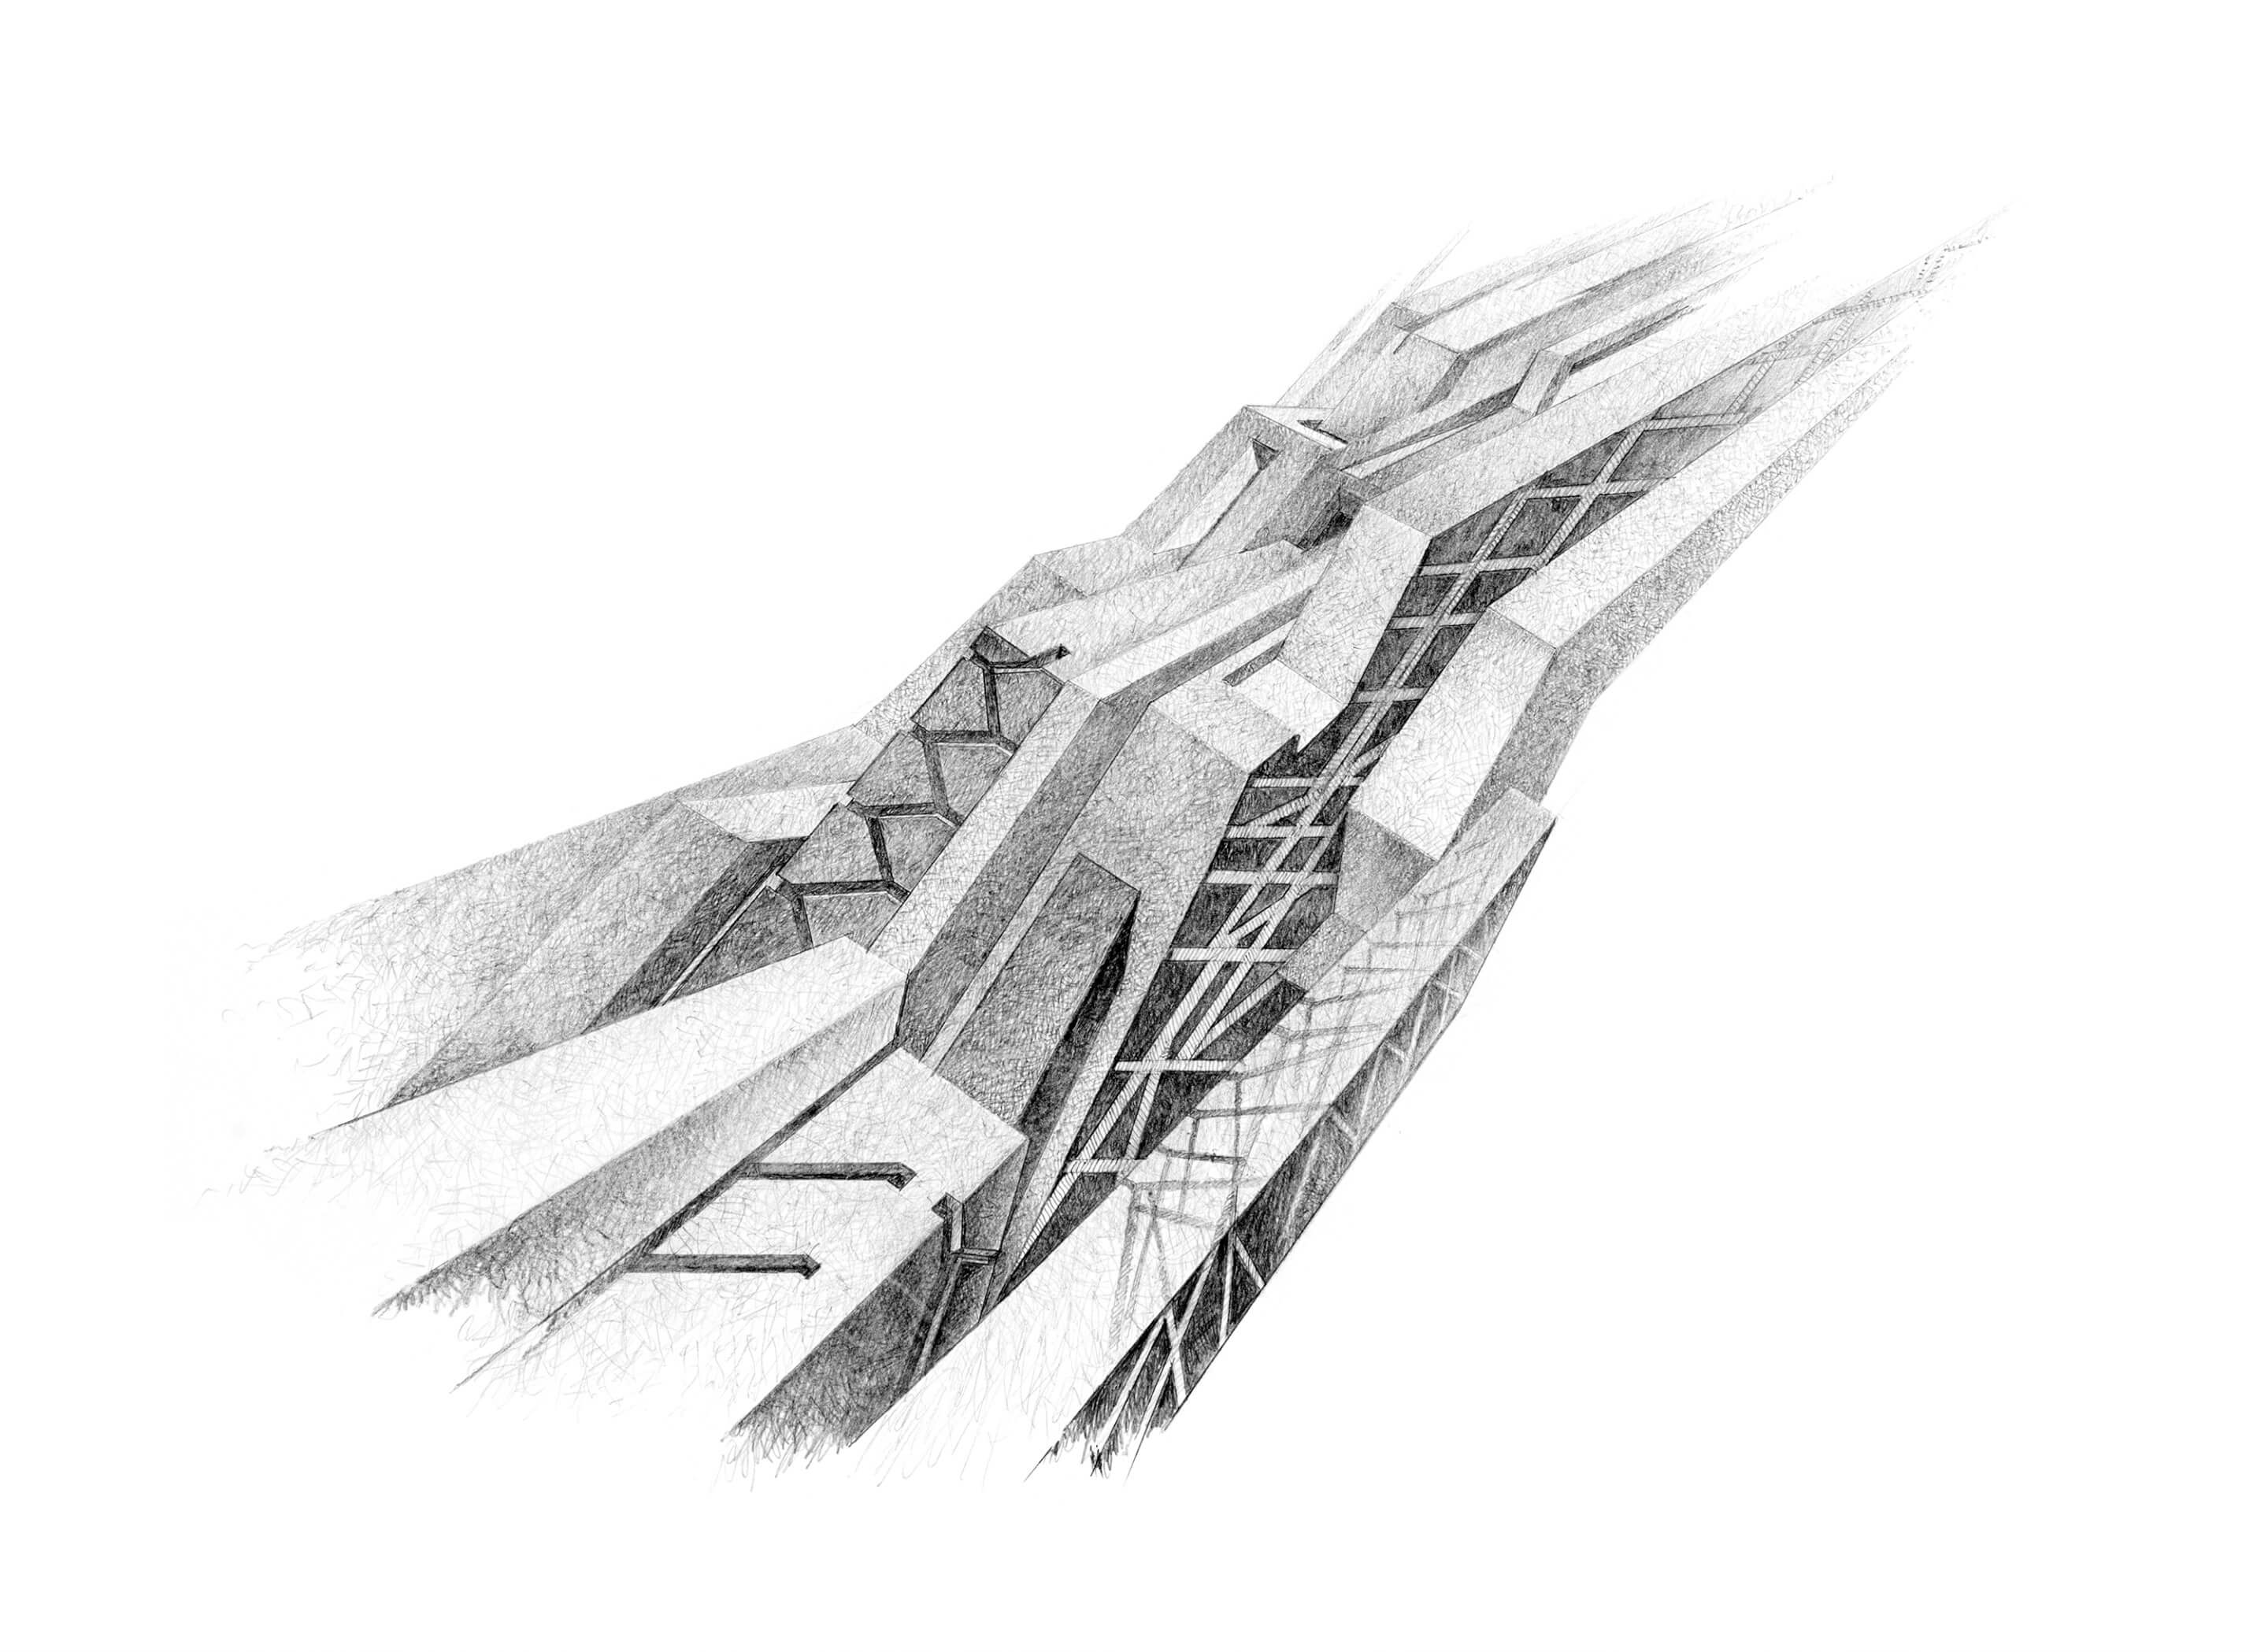 A graphite drawing on paper by Claude Parent